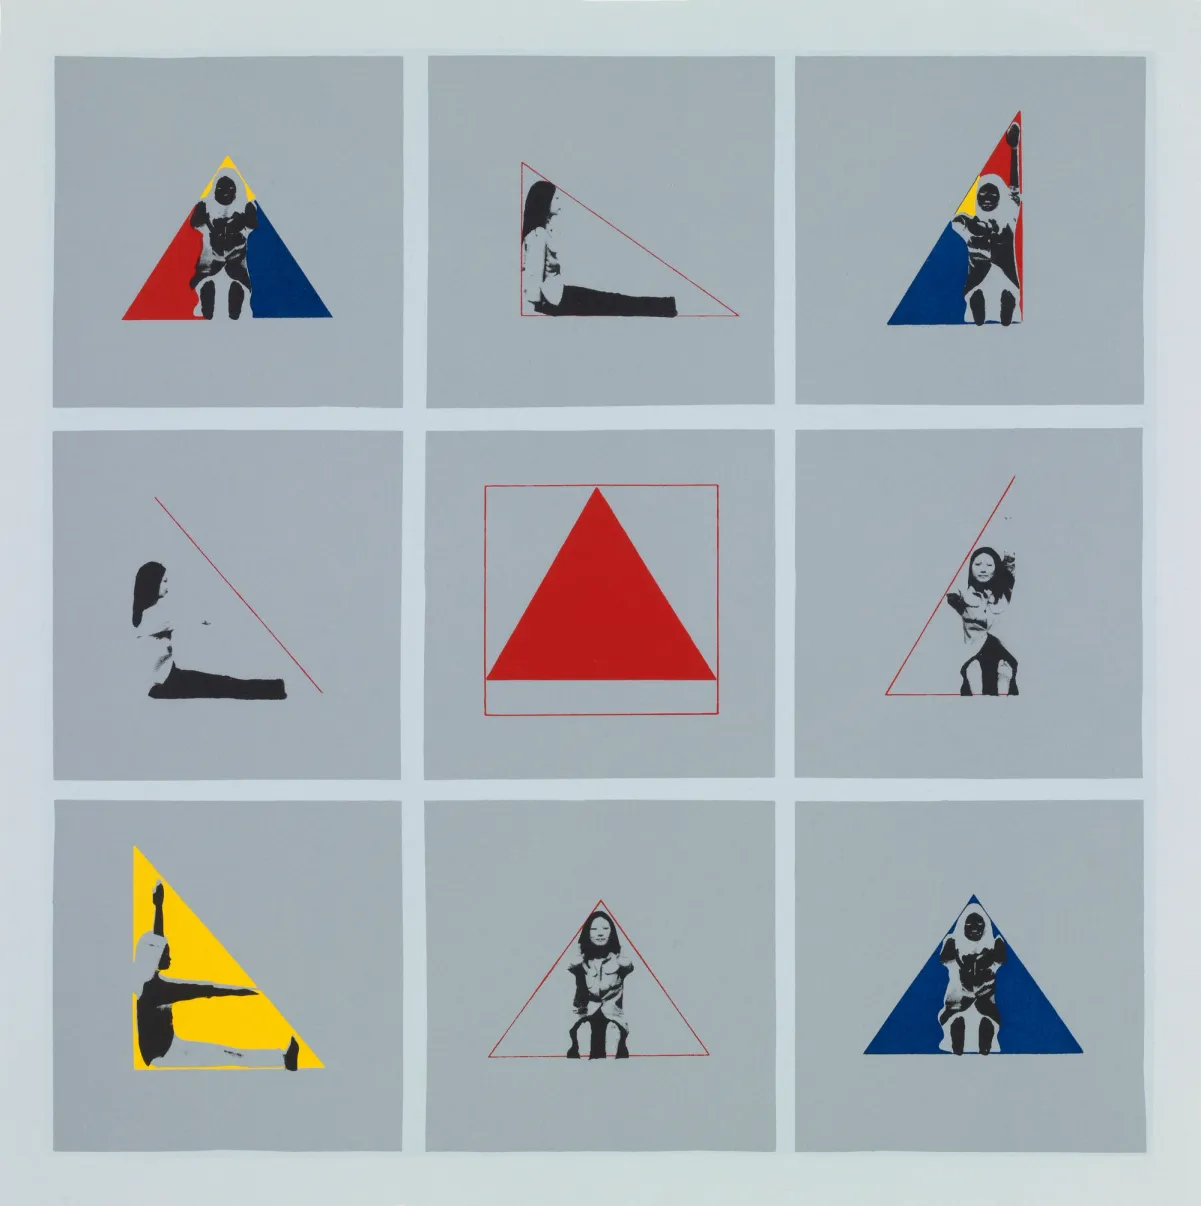 A nine-panel grid of square images on a light grey background. Each corner image shows a person in monochrome within a triangle of either red, blue or yellow. The four side images depict figures interacting with outlined red triangles, while the central image showcases just a red triangle within a square with red borders.